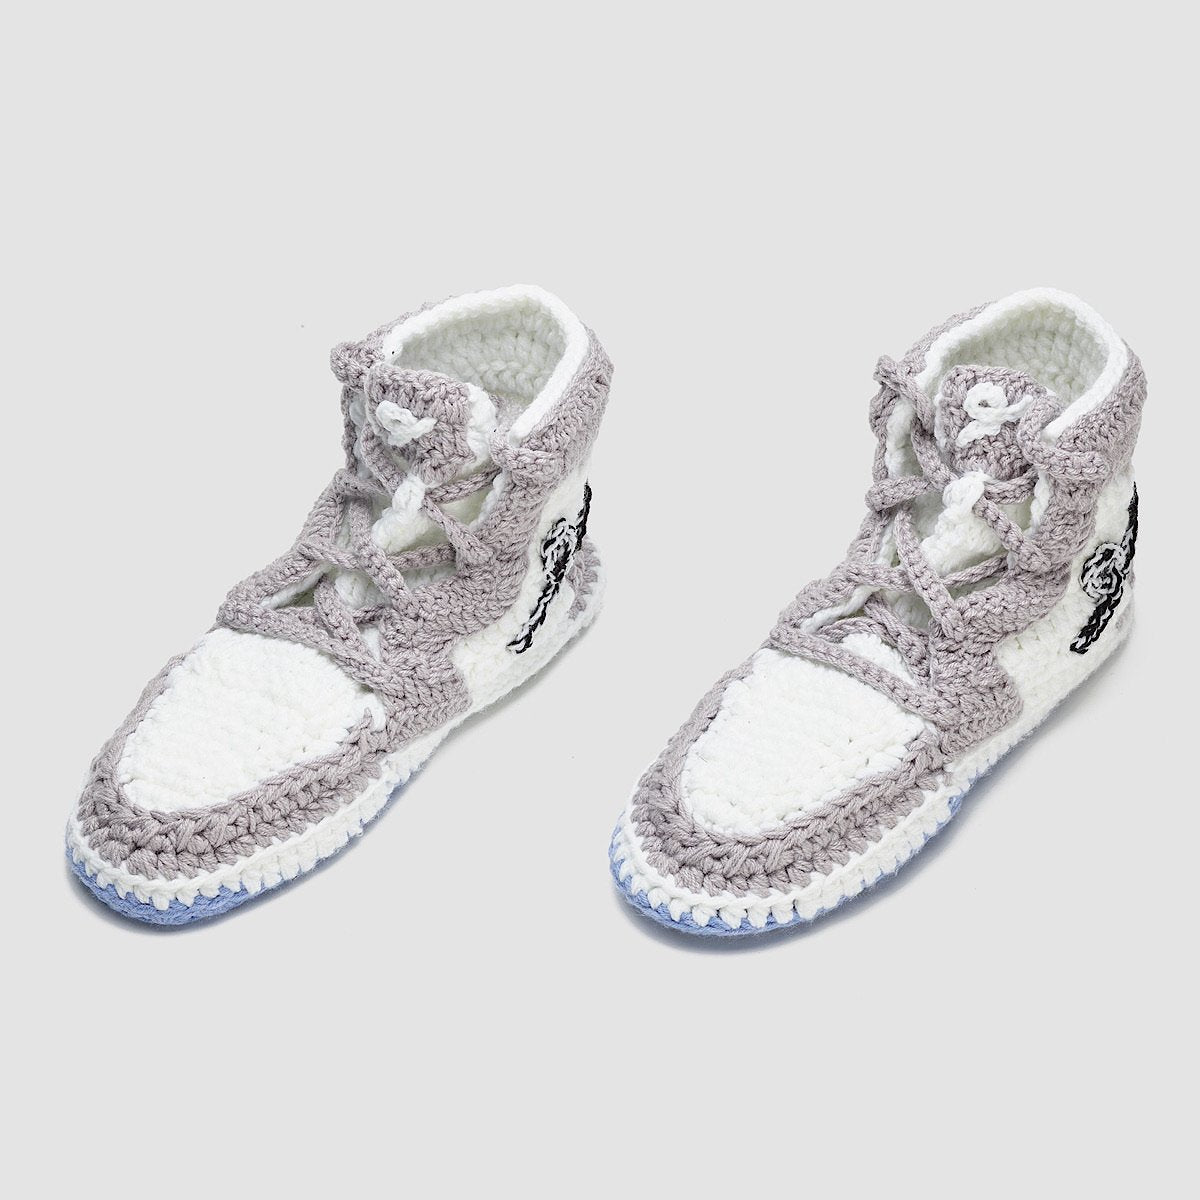 IB-1 "LUX" Slippers (All Sizes) PRE-ORDER